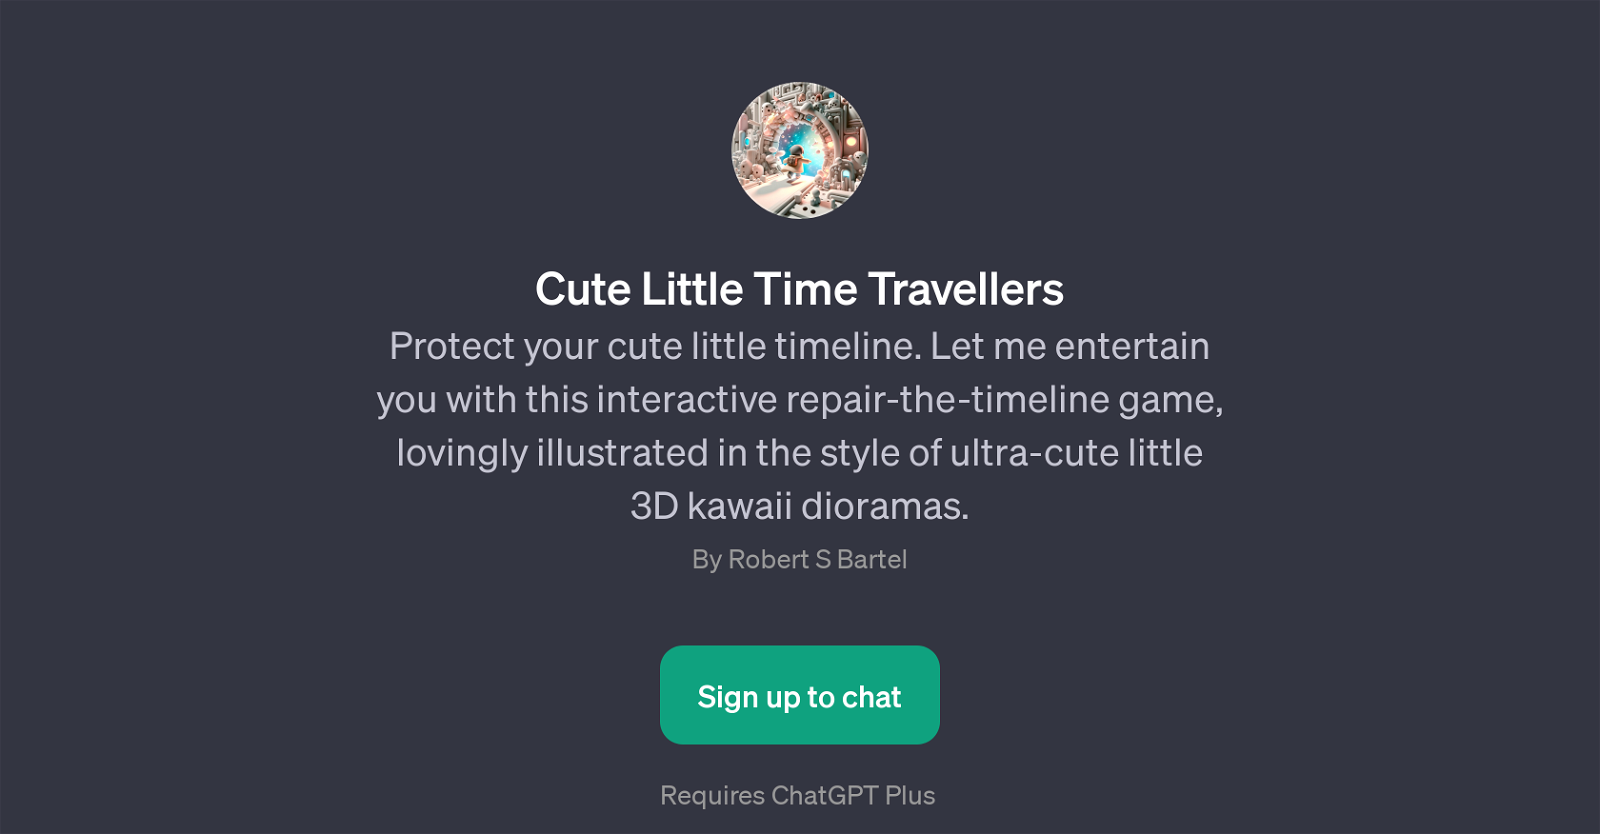 Cute Little Time Travellers website